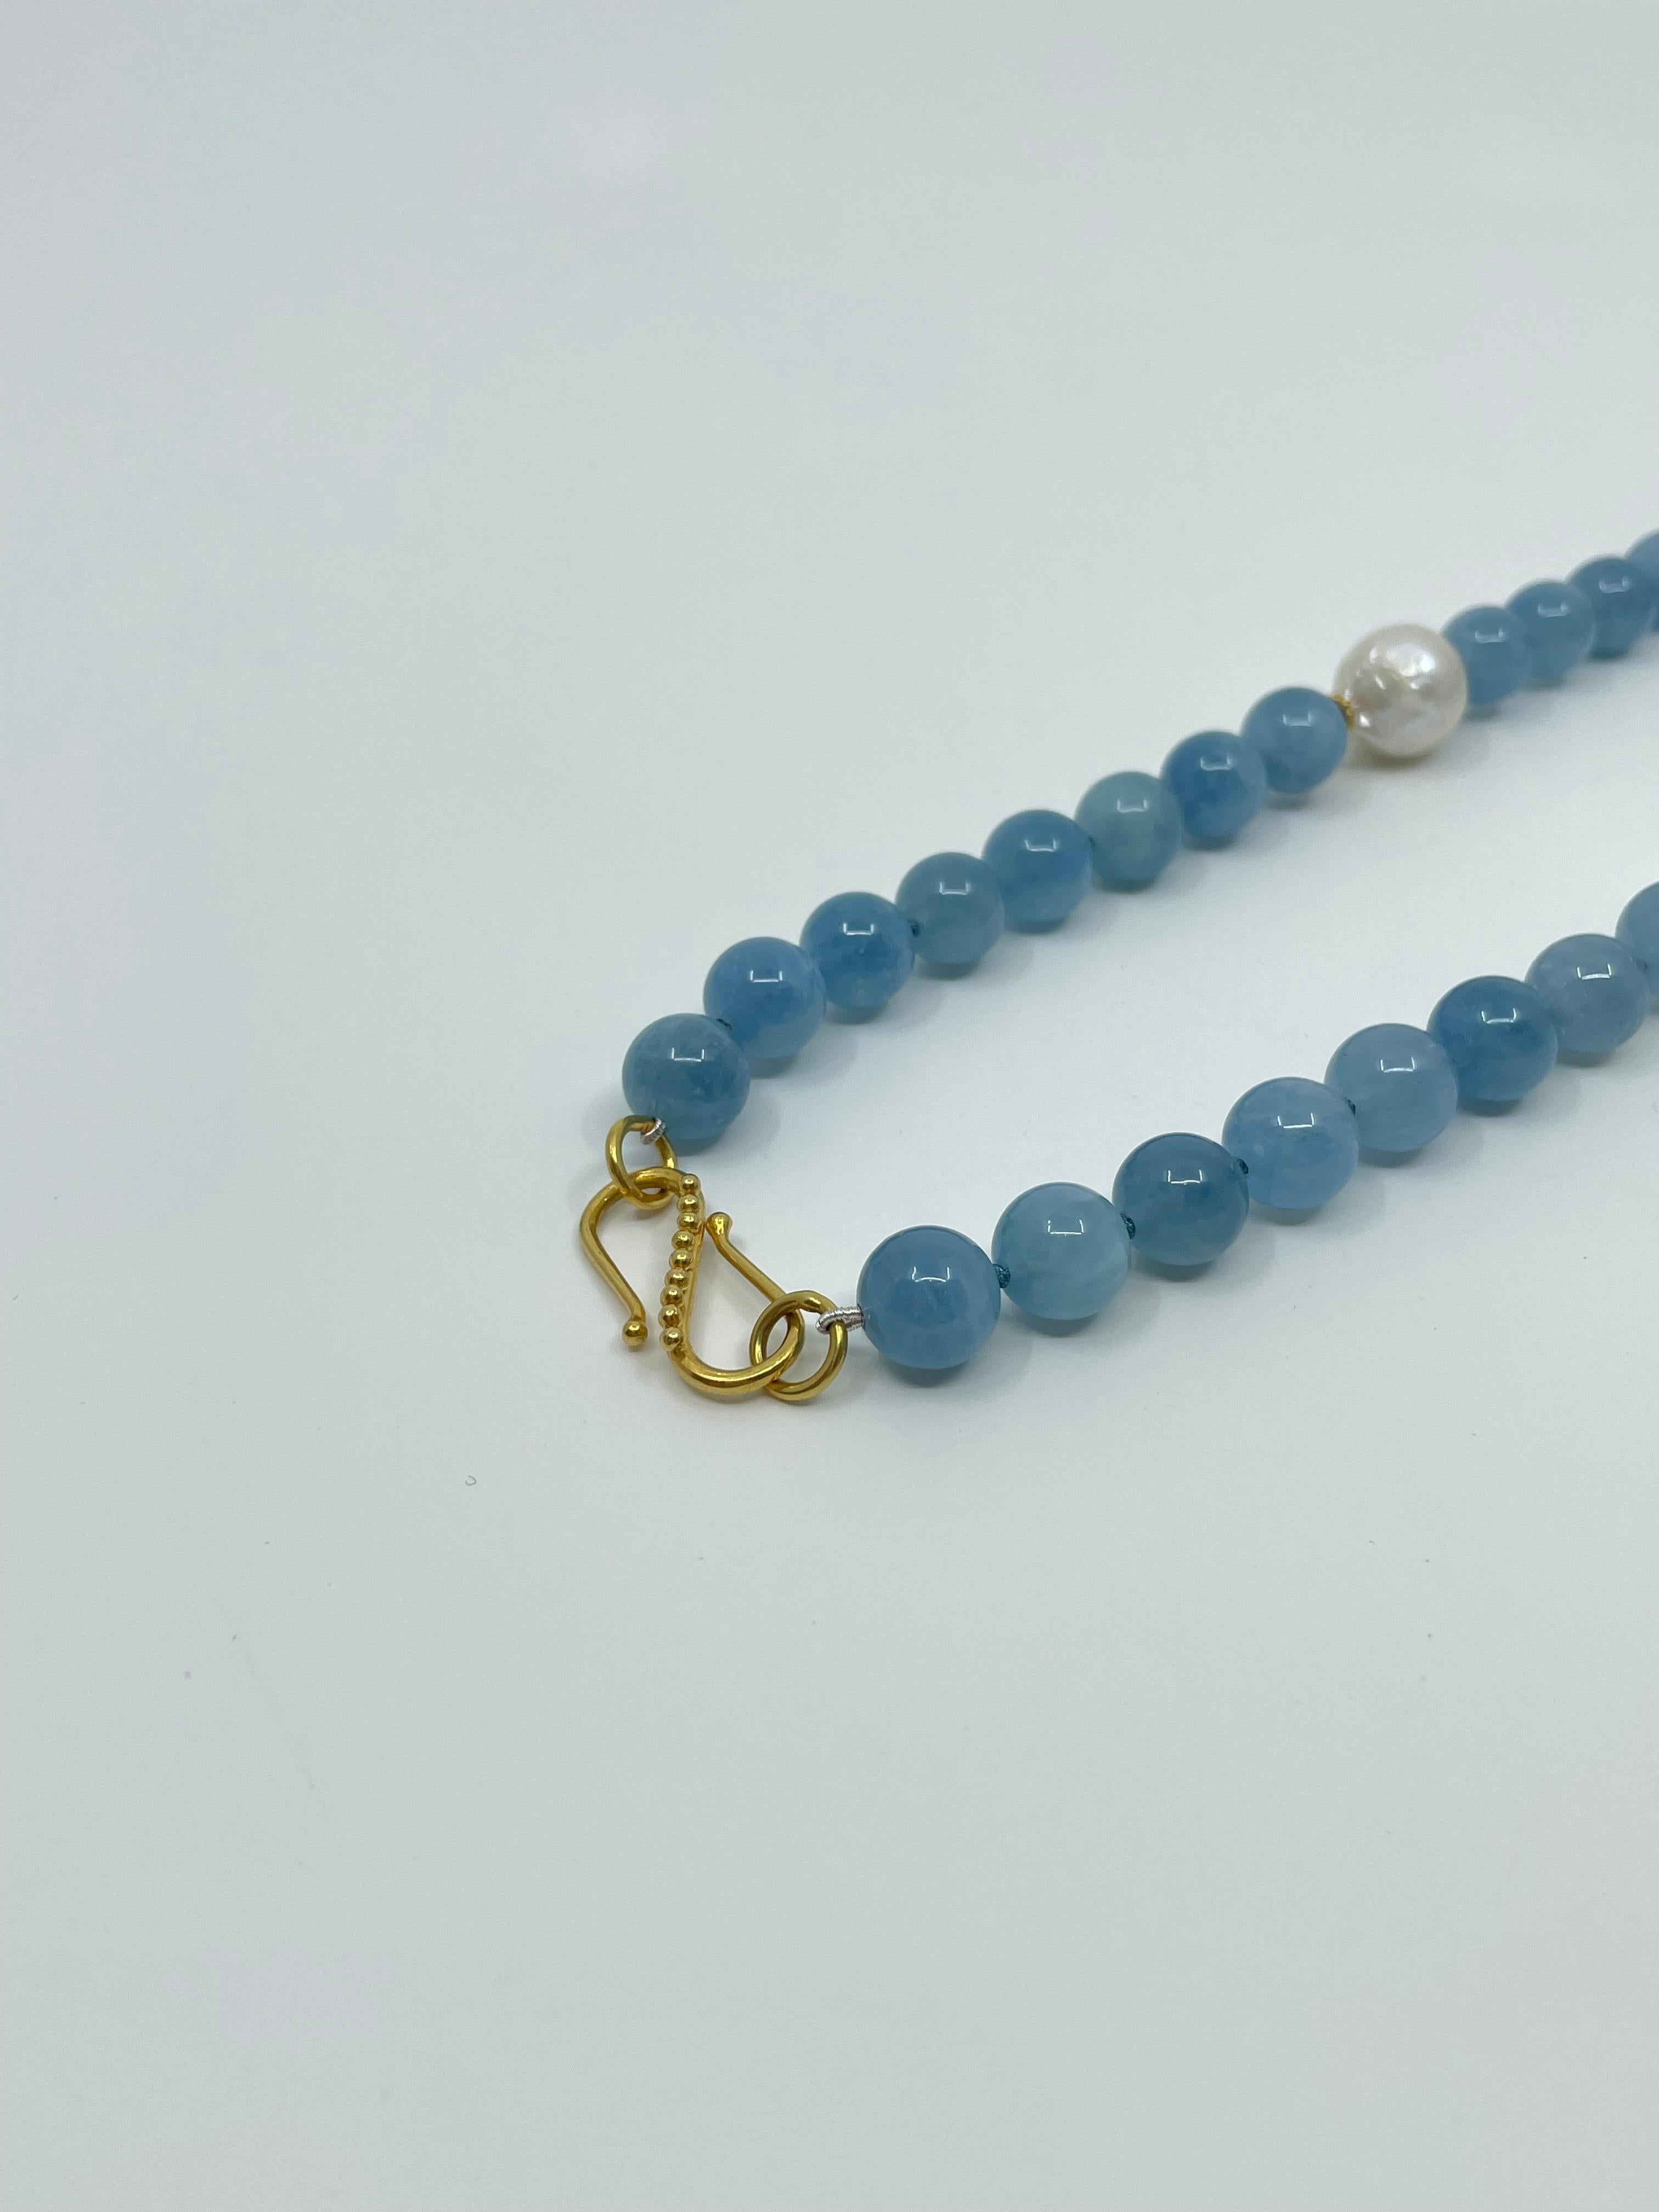 Necklace with Aquamarine, Kyanite, South Sea Pearls, Gold & 18K Gold For Sale 7